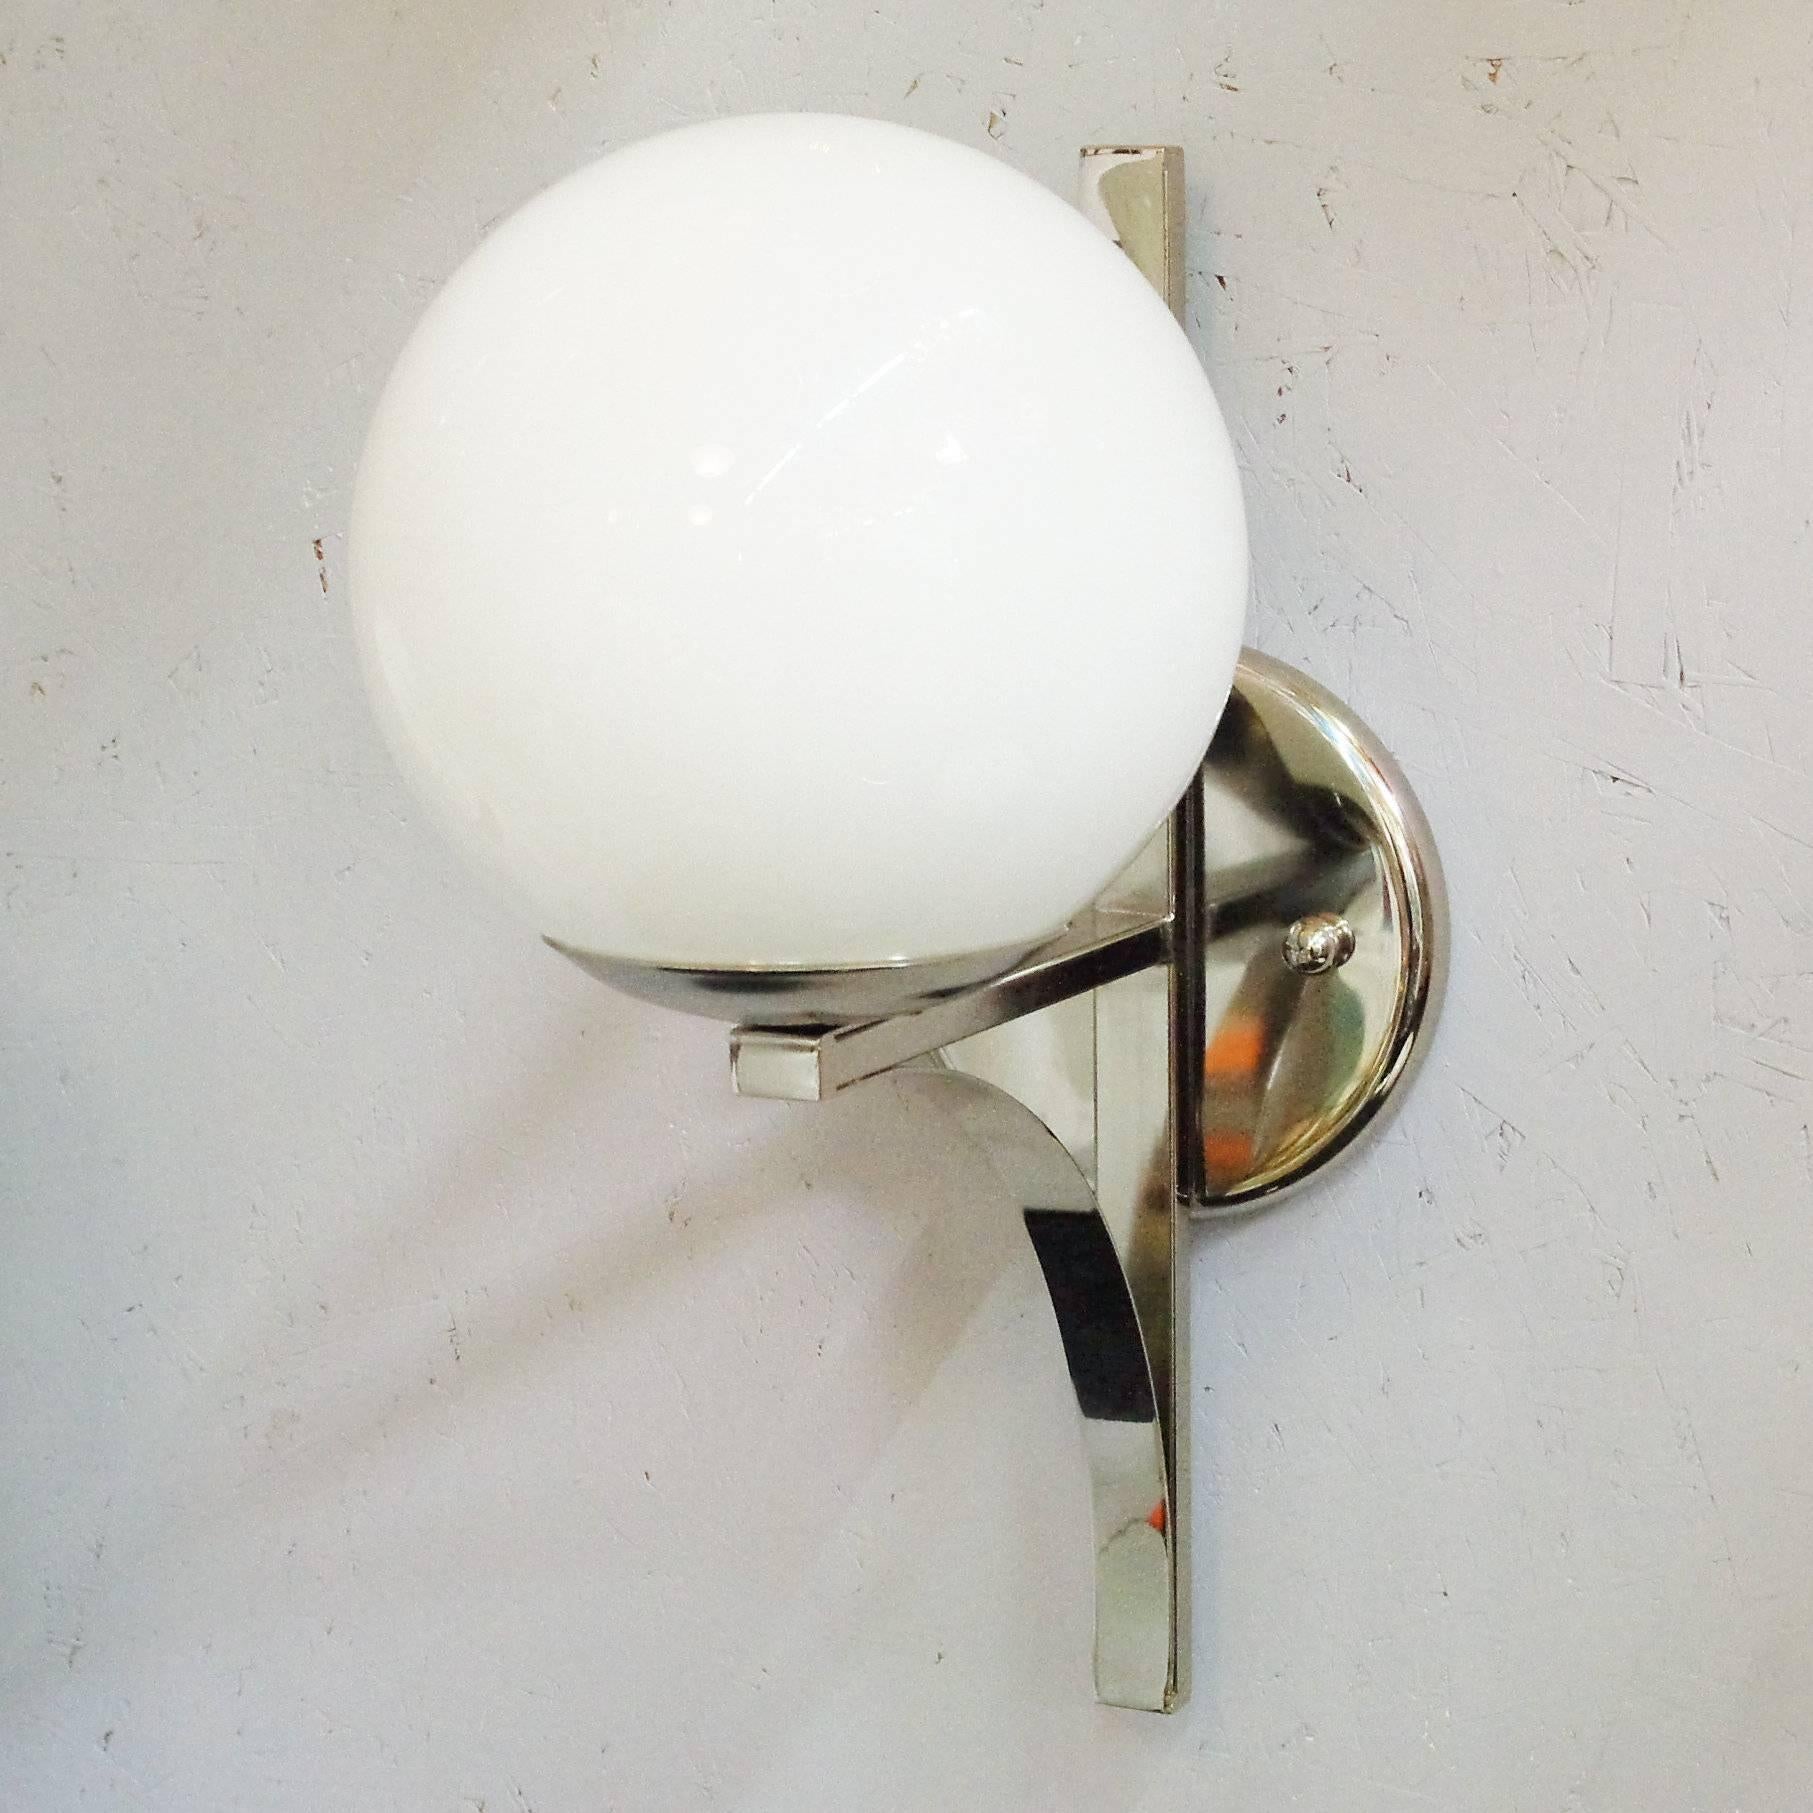 Murano glass white globes on nickel brackets sconces.
Newly rewired with single standard light socket in each sconce.
7 available / price listed is for one sconce.
